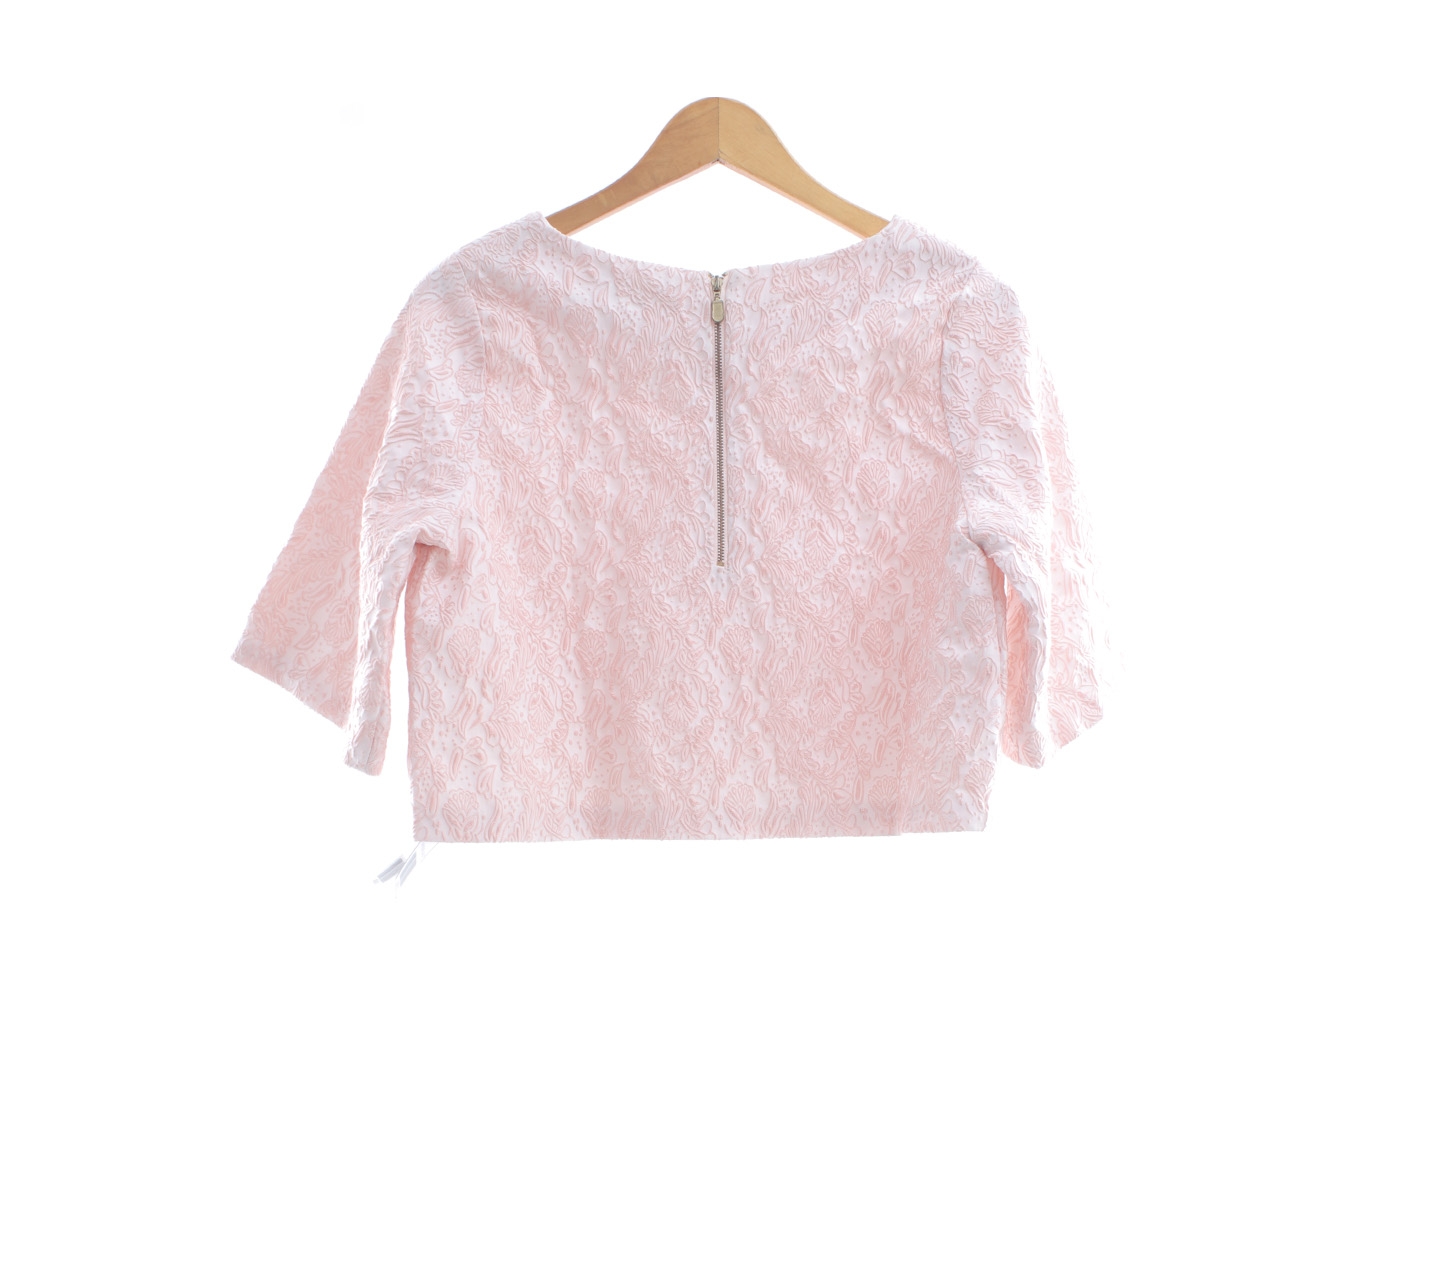 All Prim Up Patterned Peach Blouse